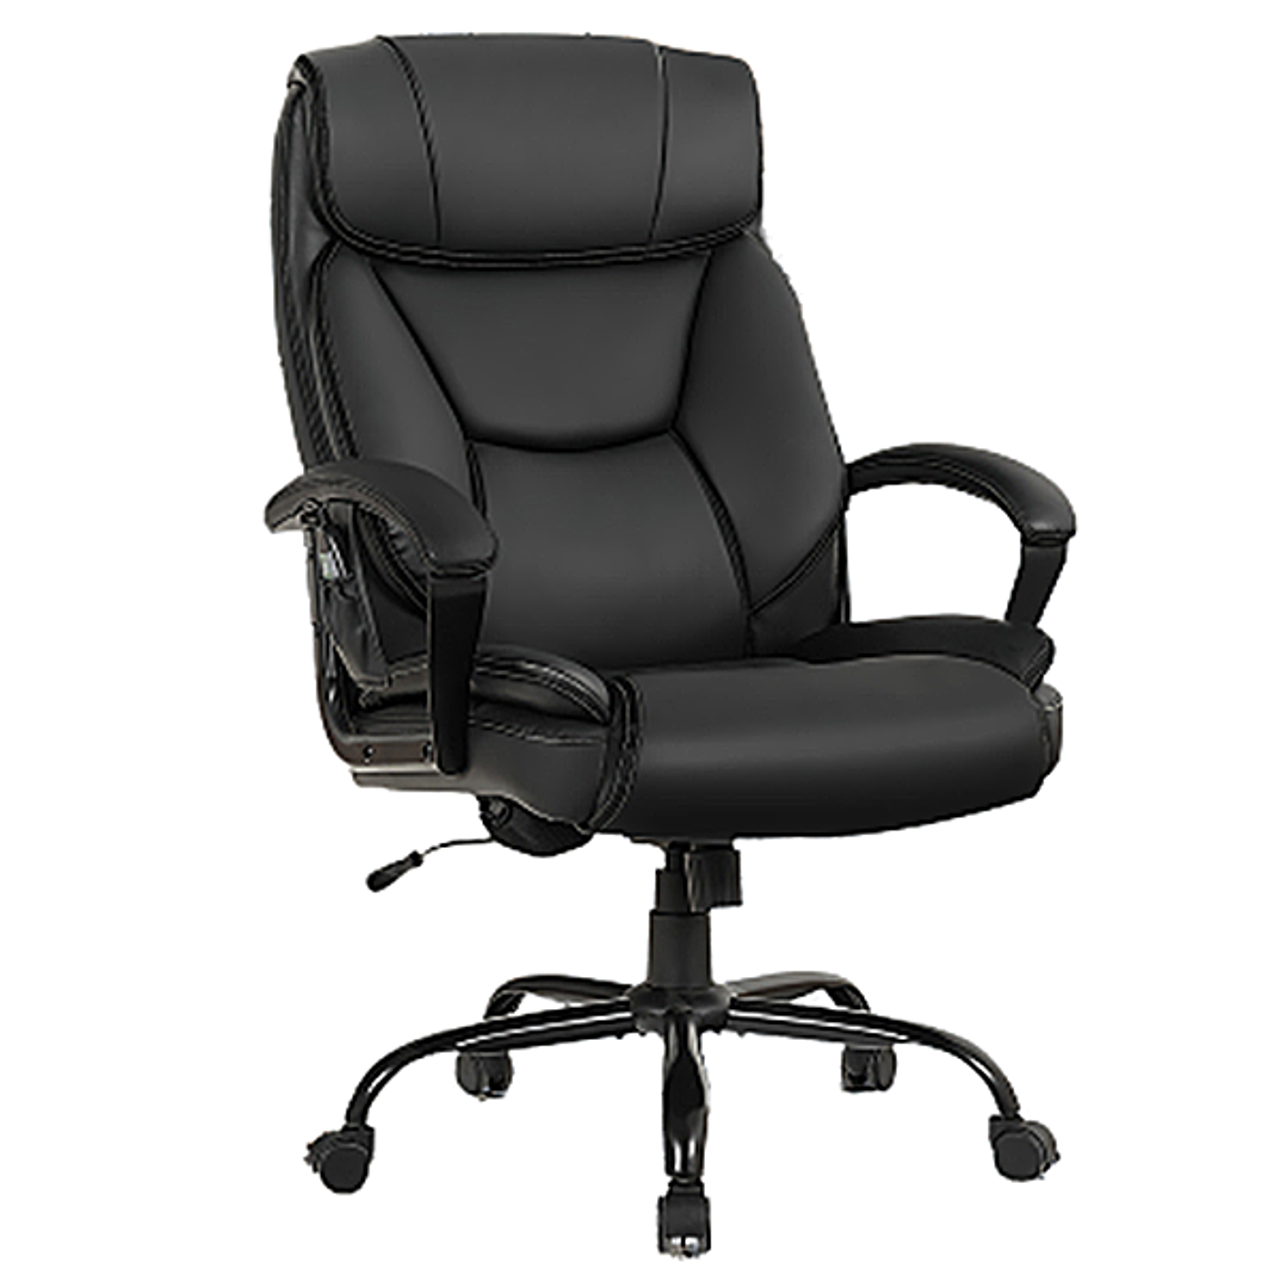 Executive Massaging Office Chair, Faux Leather product image